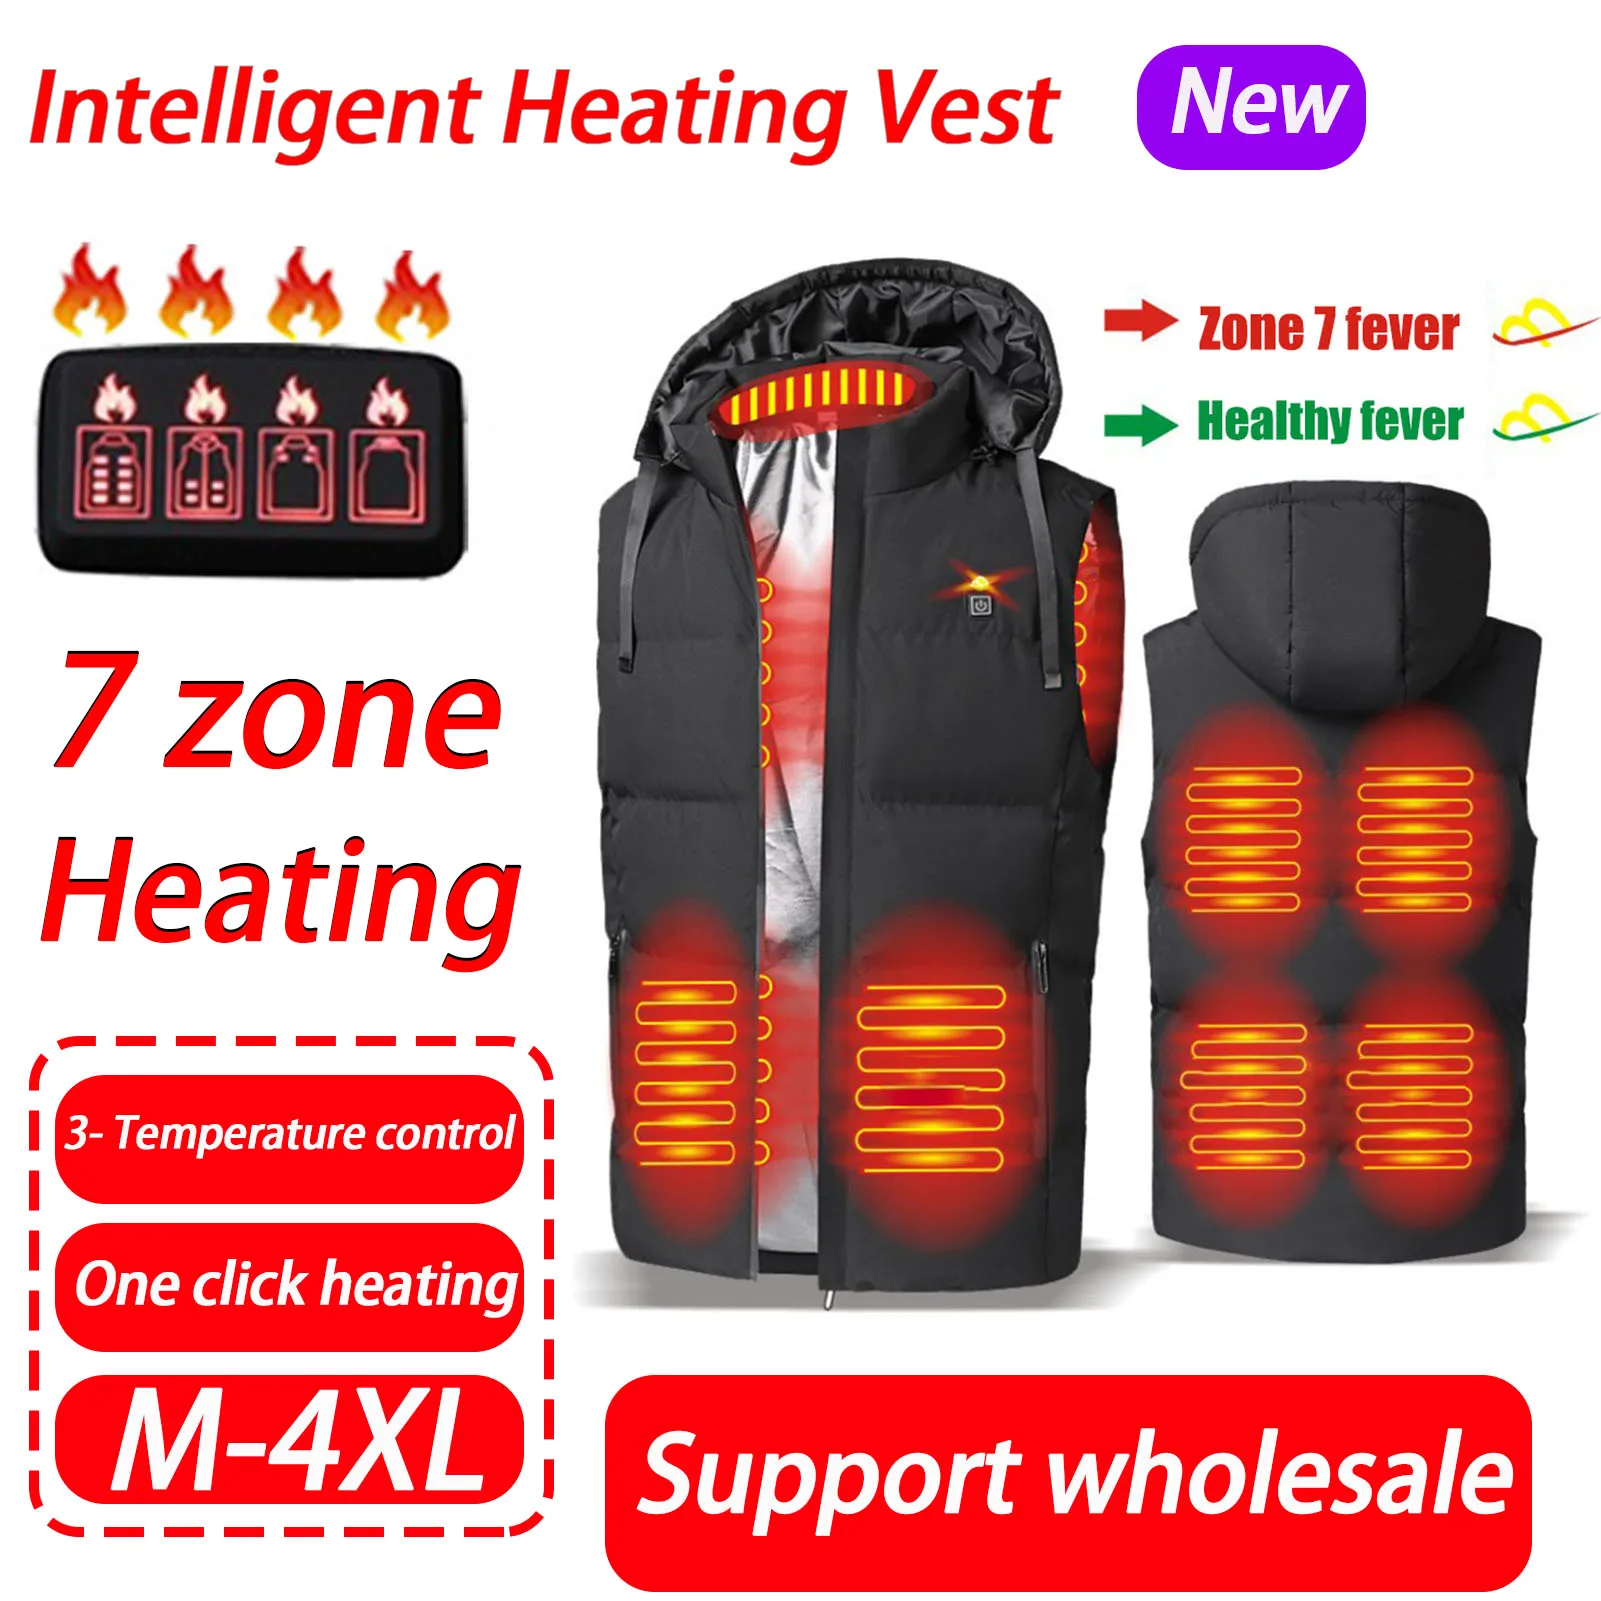 

Smart Electric Heating Vest Autumn Winter Warm USB Electric Heated Vest Waterproof Hooded Waistcoat 3 Modes for Hunting Hiking